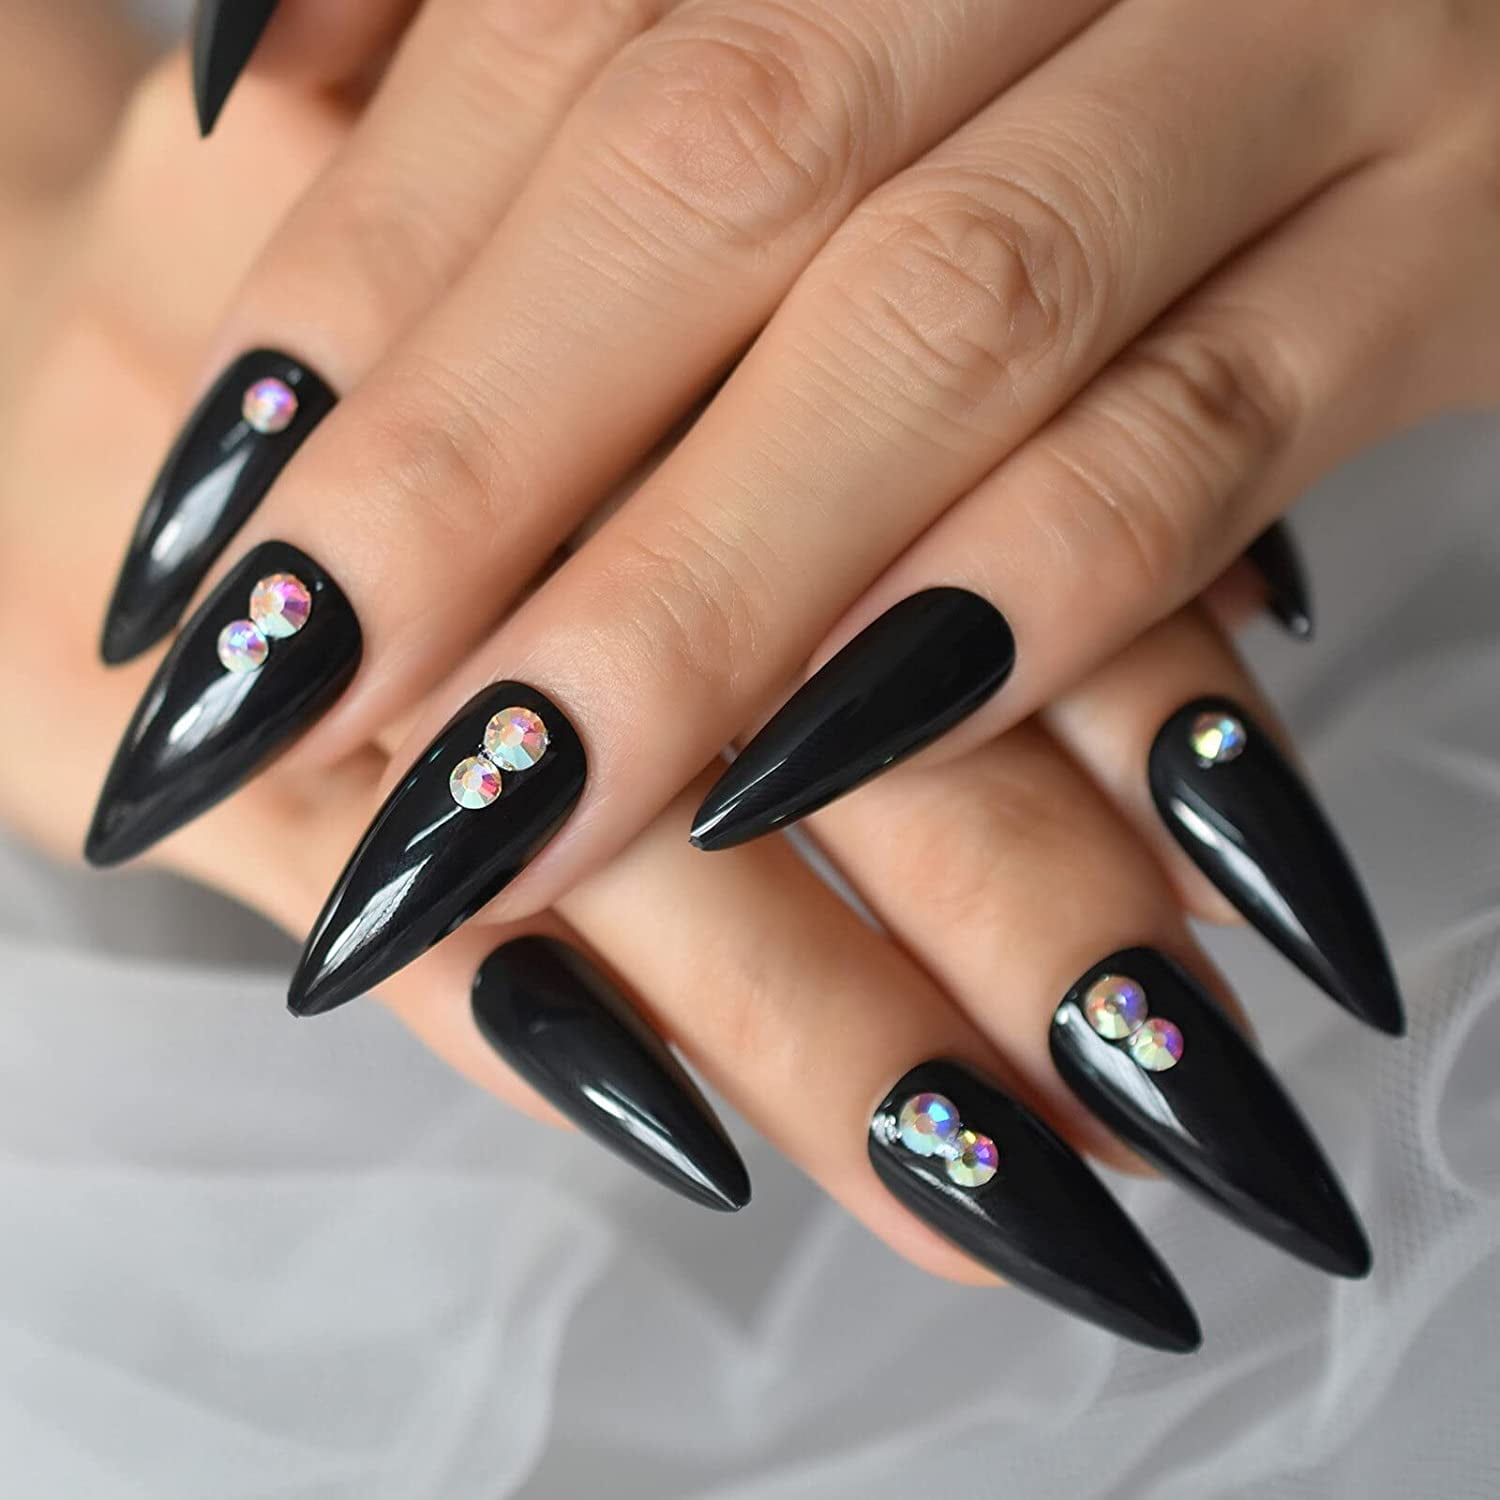 Share more than 144 black holographic glitter nails best